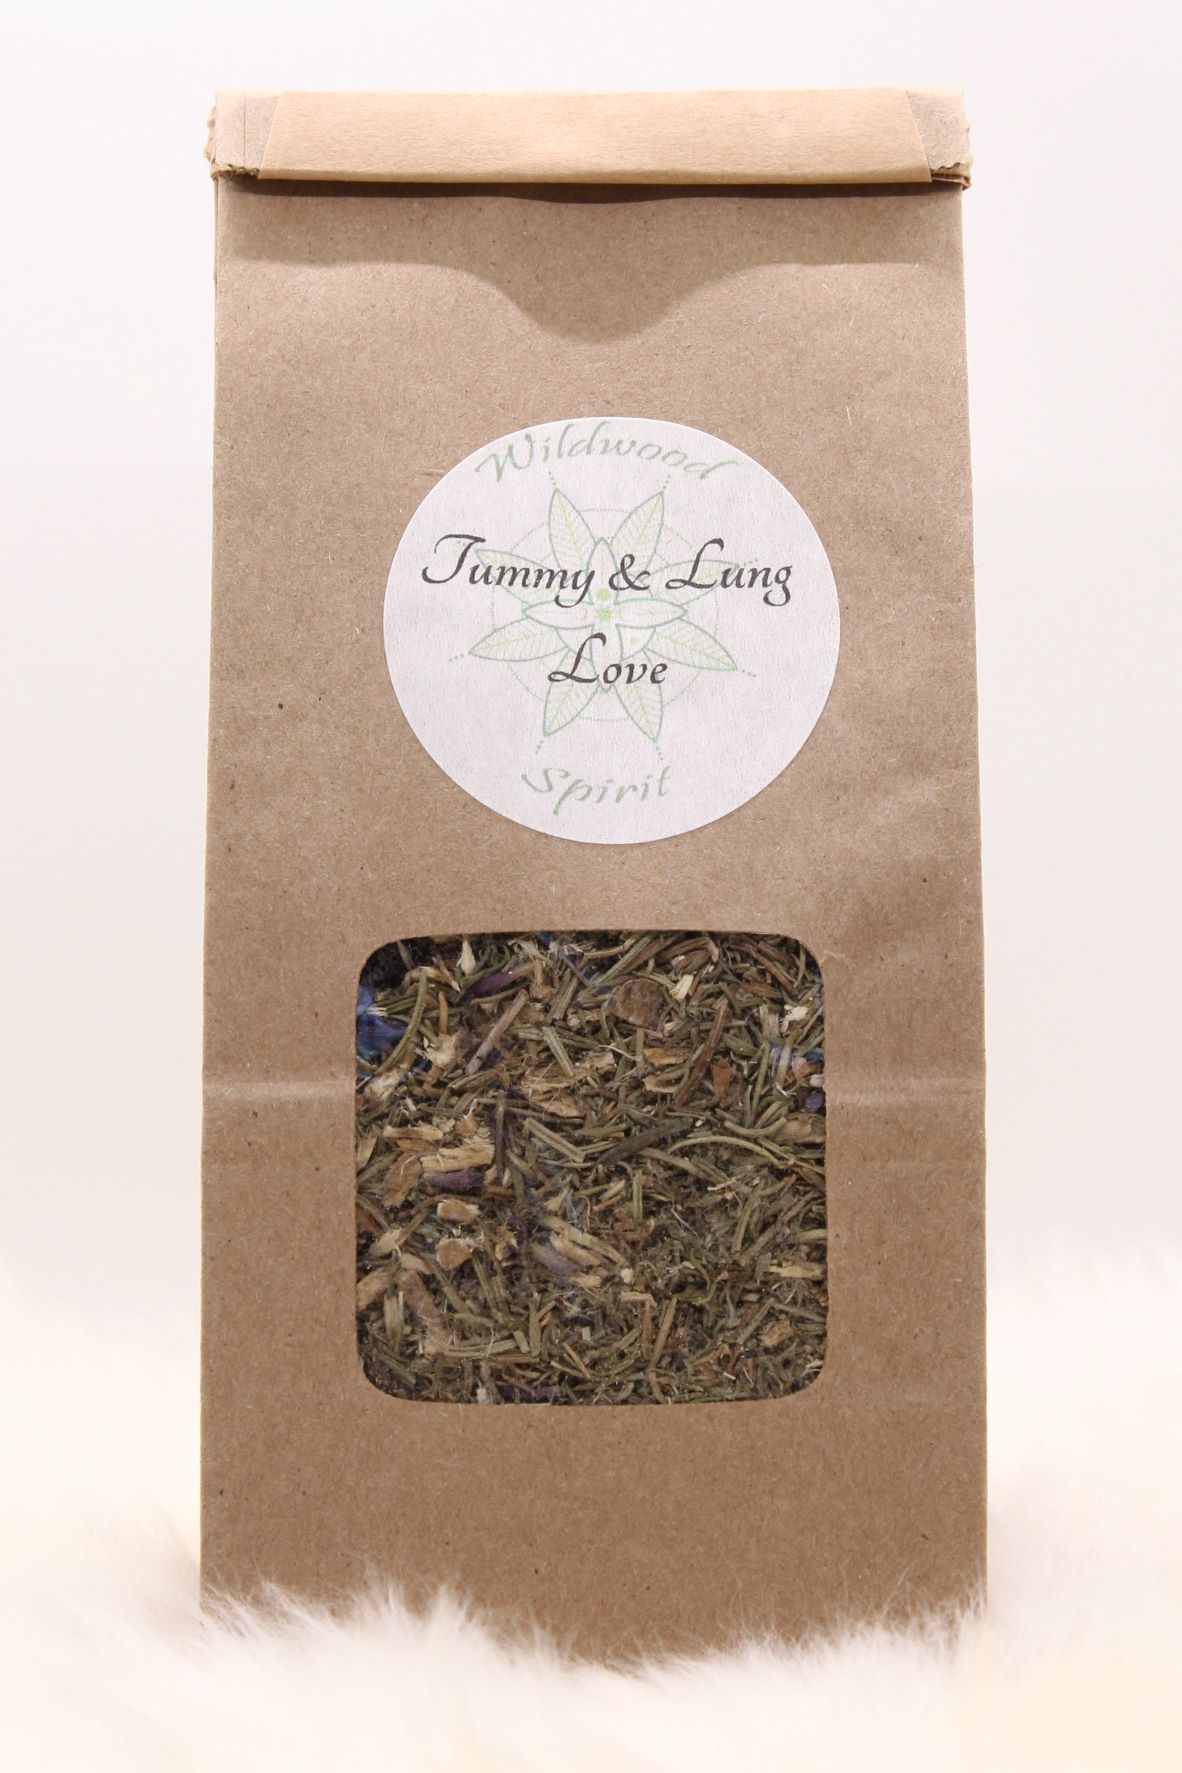 Tummy & Lung Love Tea Packaged